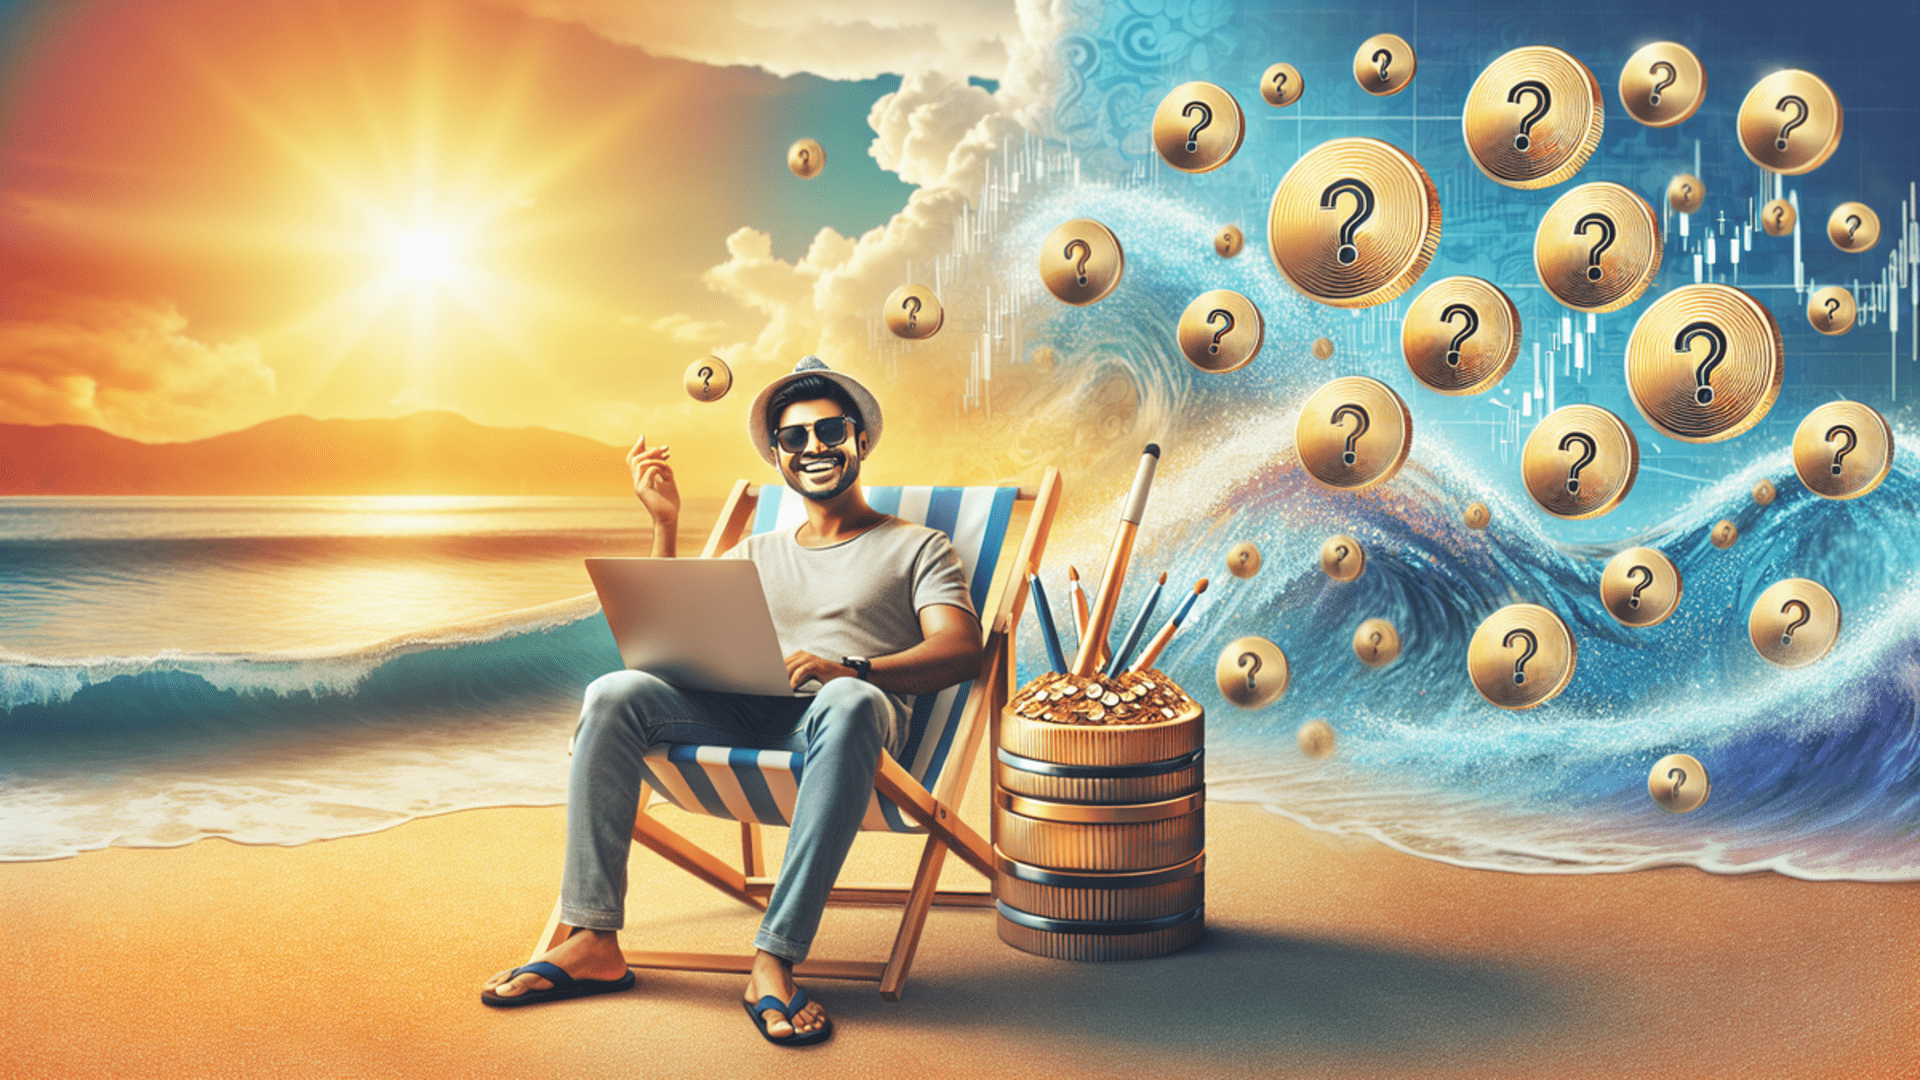 Summer’s Hottest Cryptos – July Will See Price Rise According to Latest Research